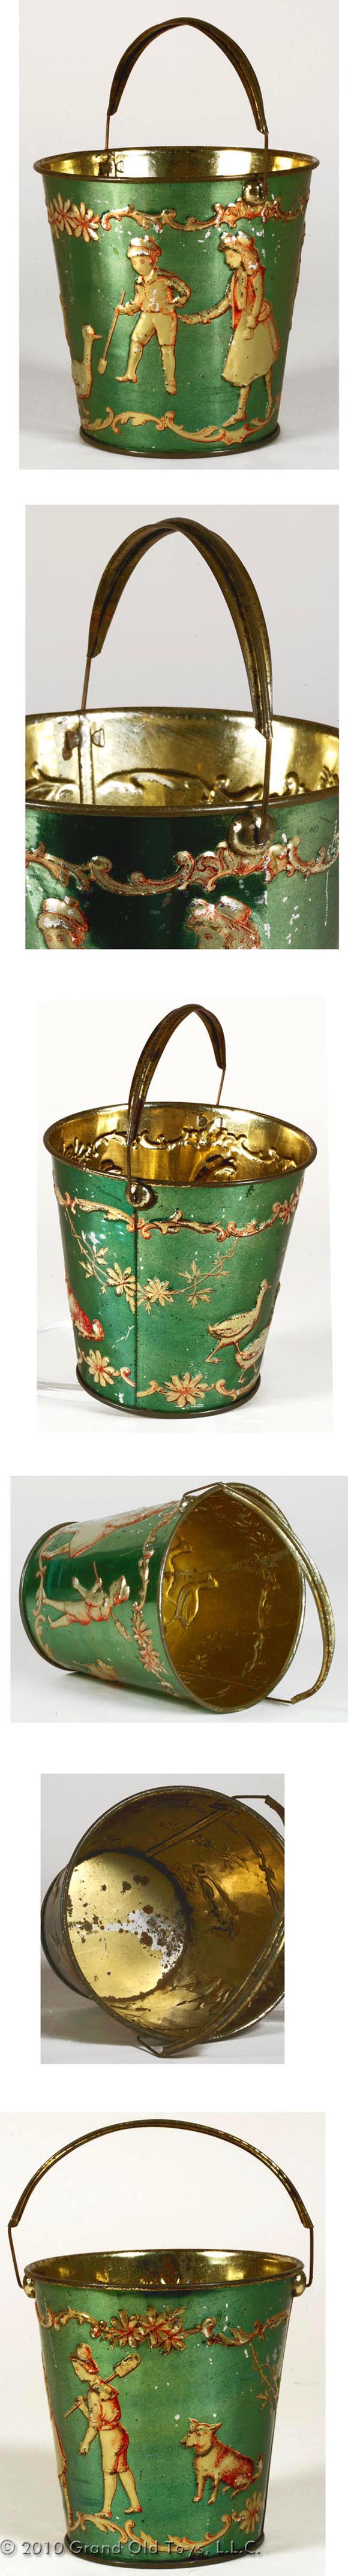 c.1900 Children's Victorian Green Sand Pail with Bail